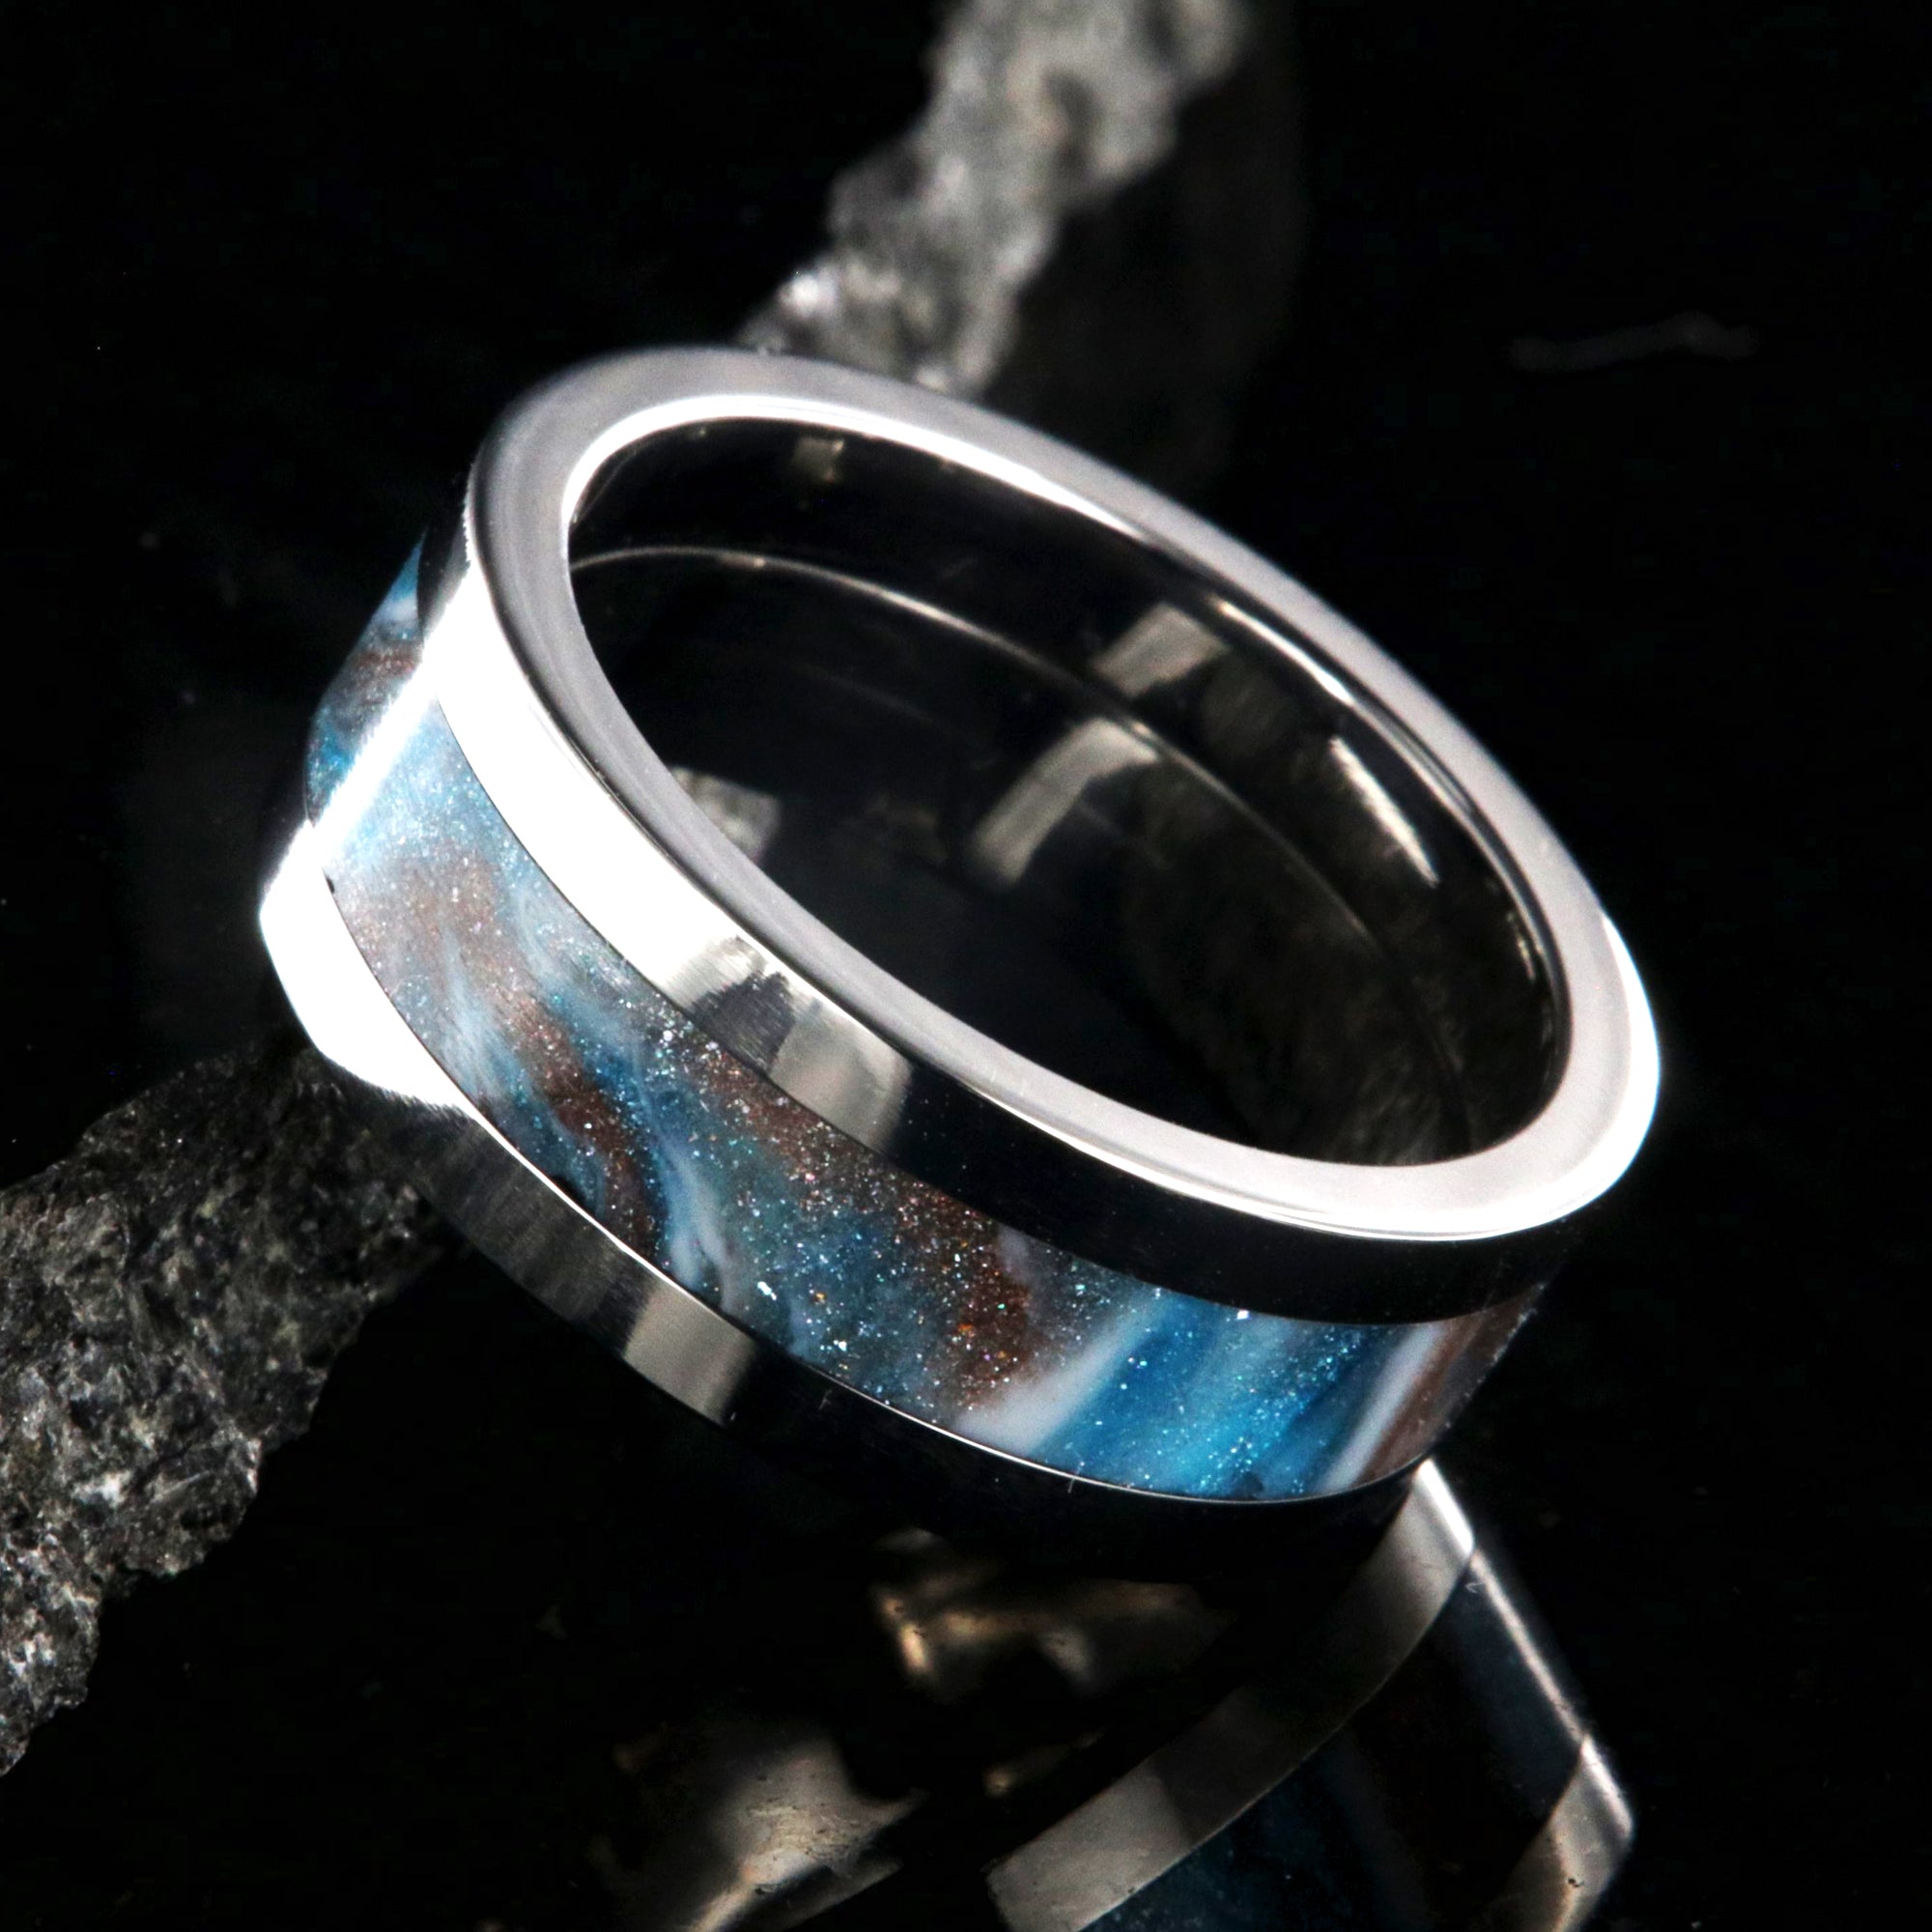 8mm wide titanium ring with blue, white, and brown glittering inlay